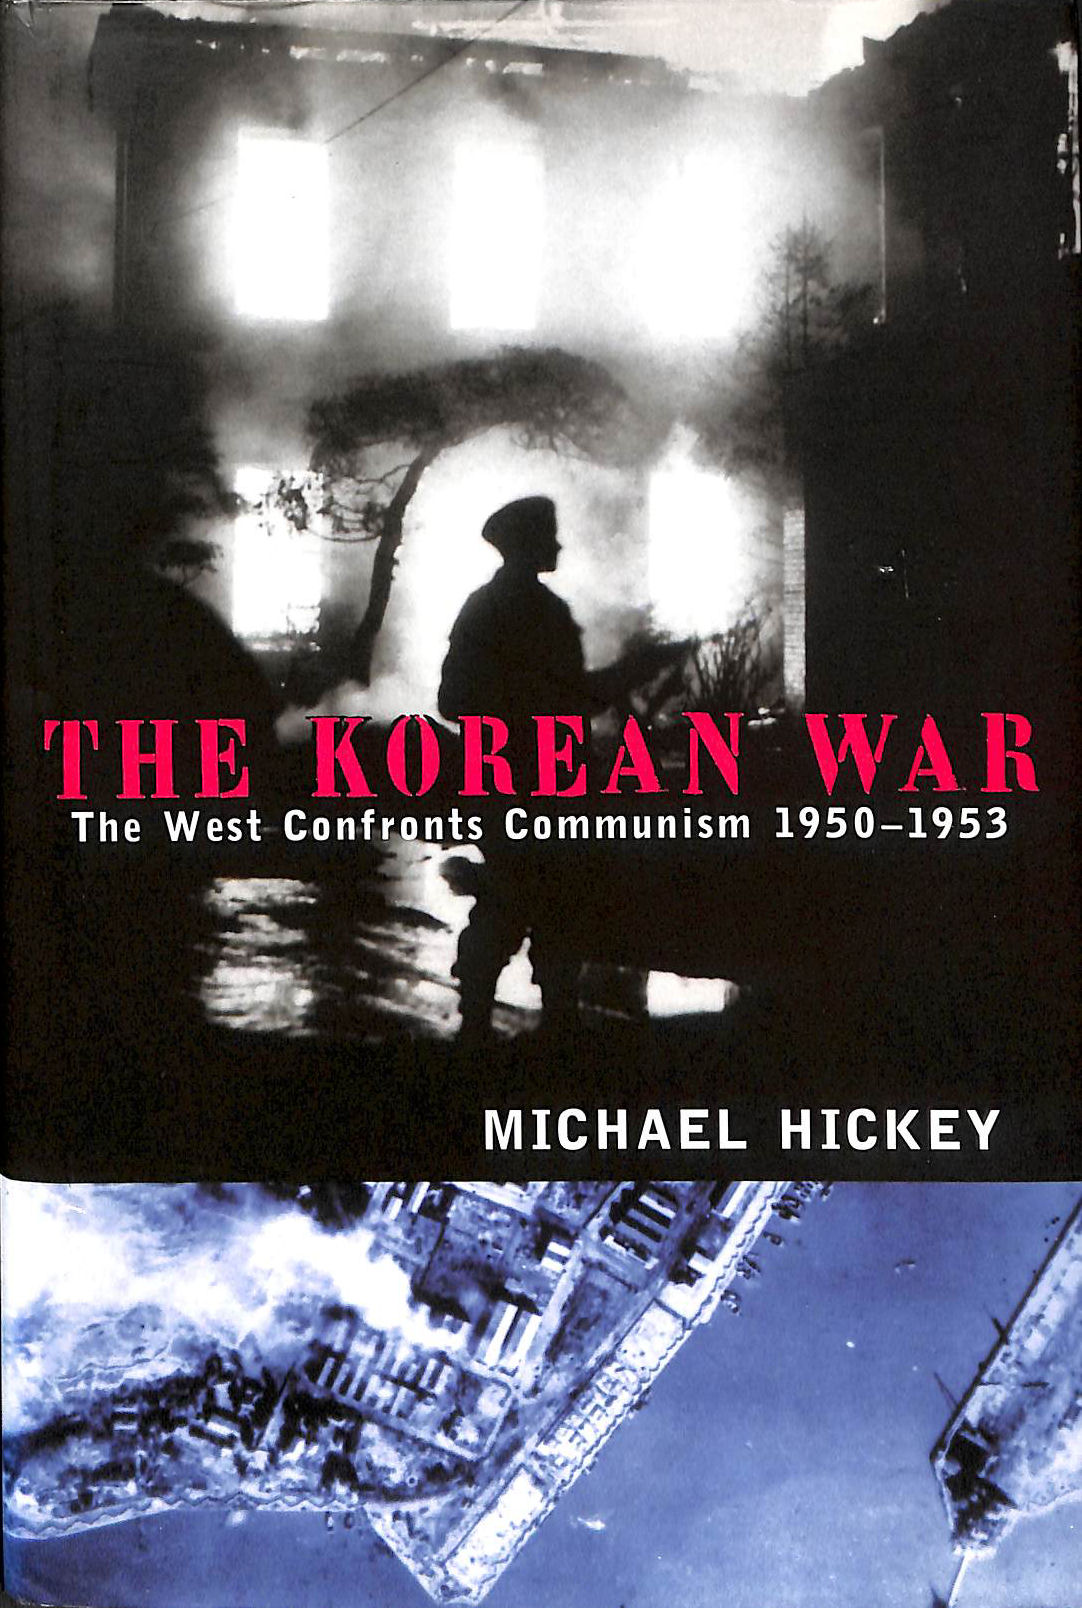 HICKEY, MICHAEL - The Korean War: The West Confronts Communism, 1950-1953